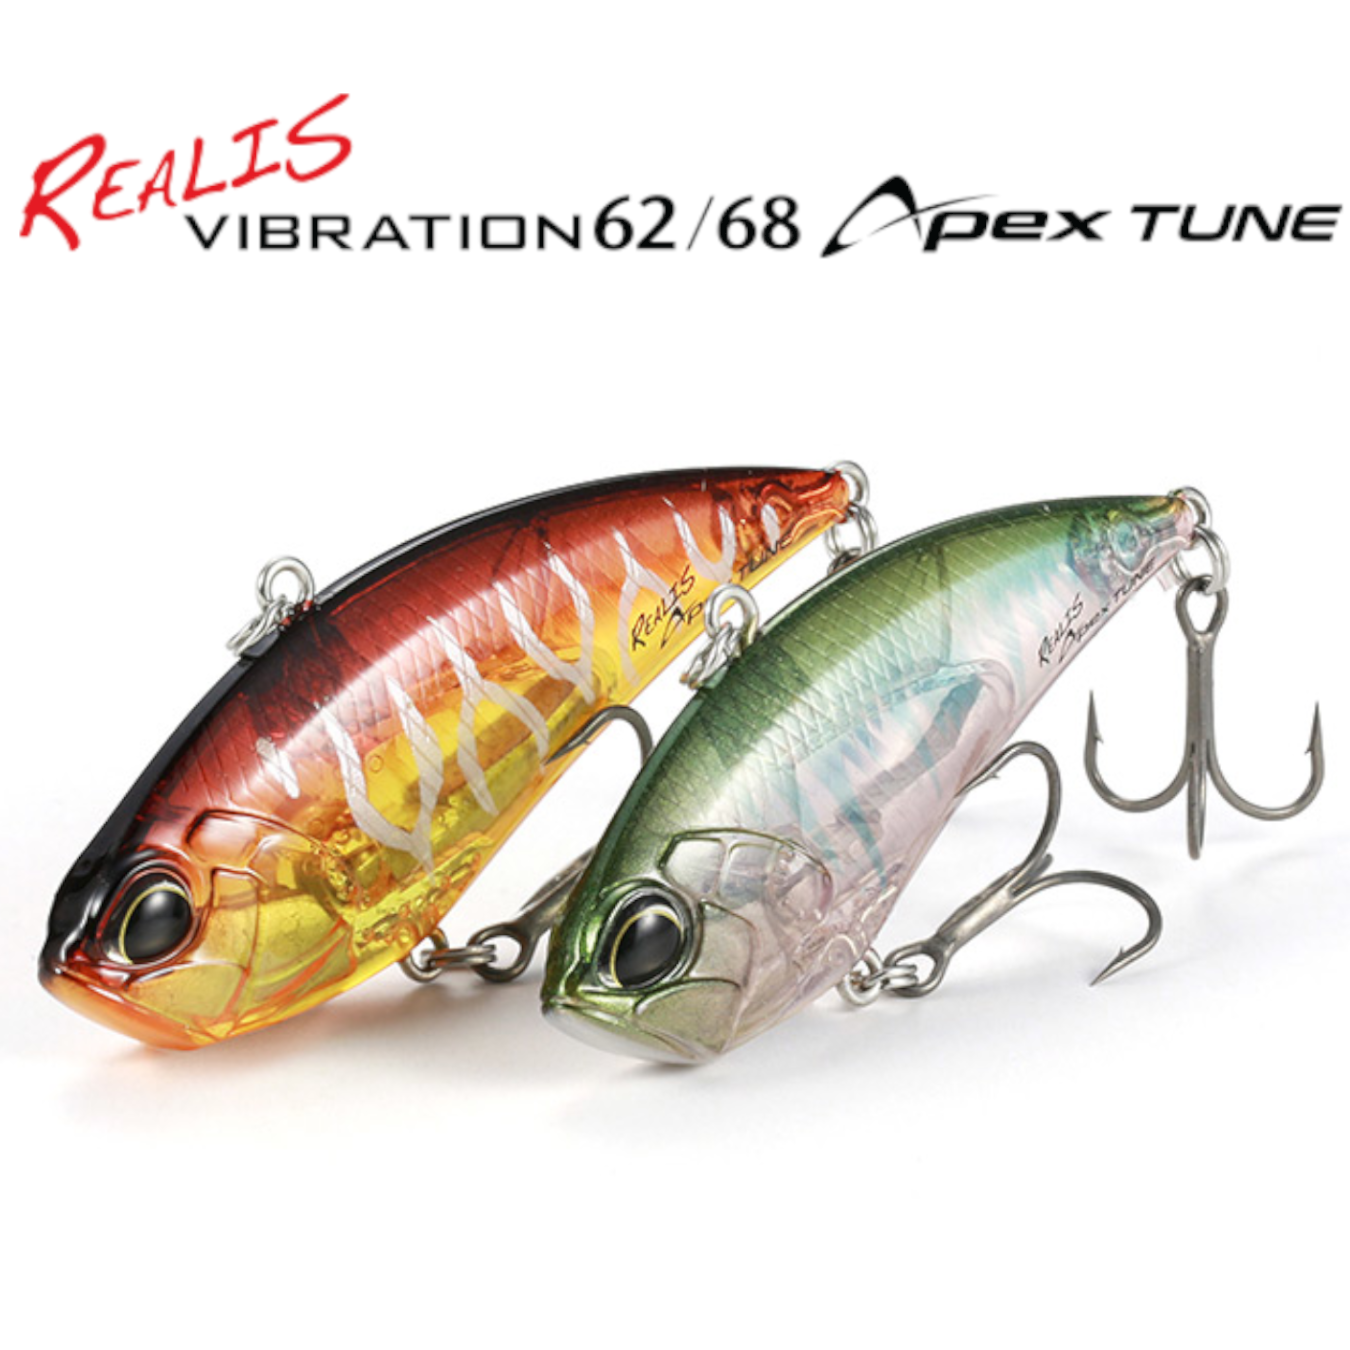 duo fishing lures, duo fishing lures Suppliers and Manufacturers at